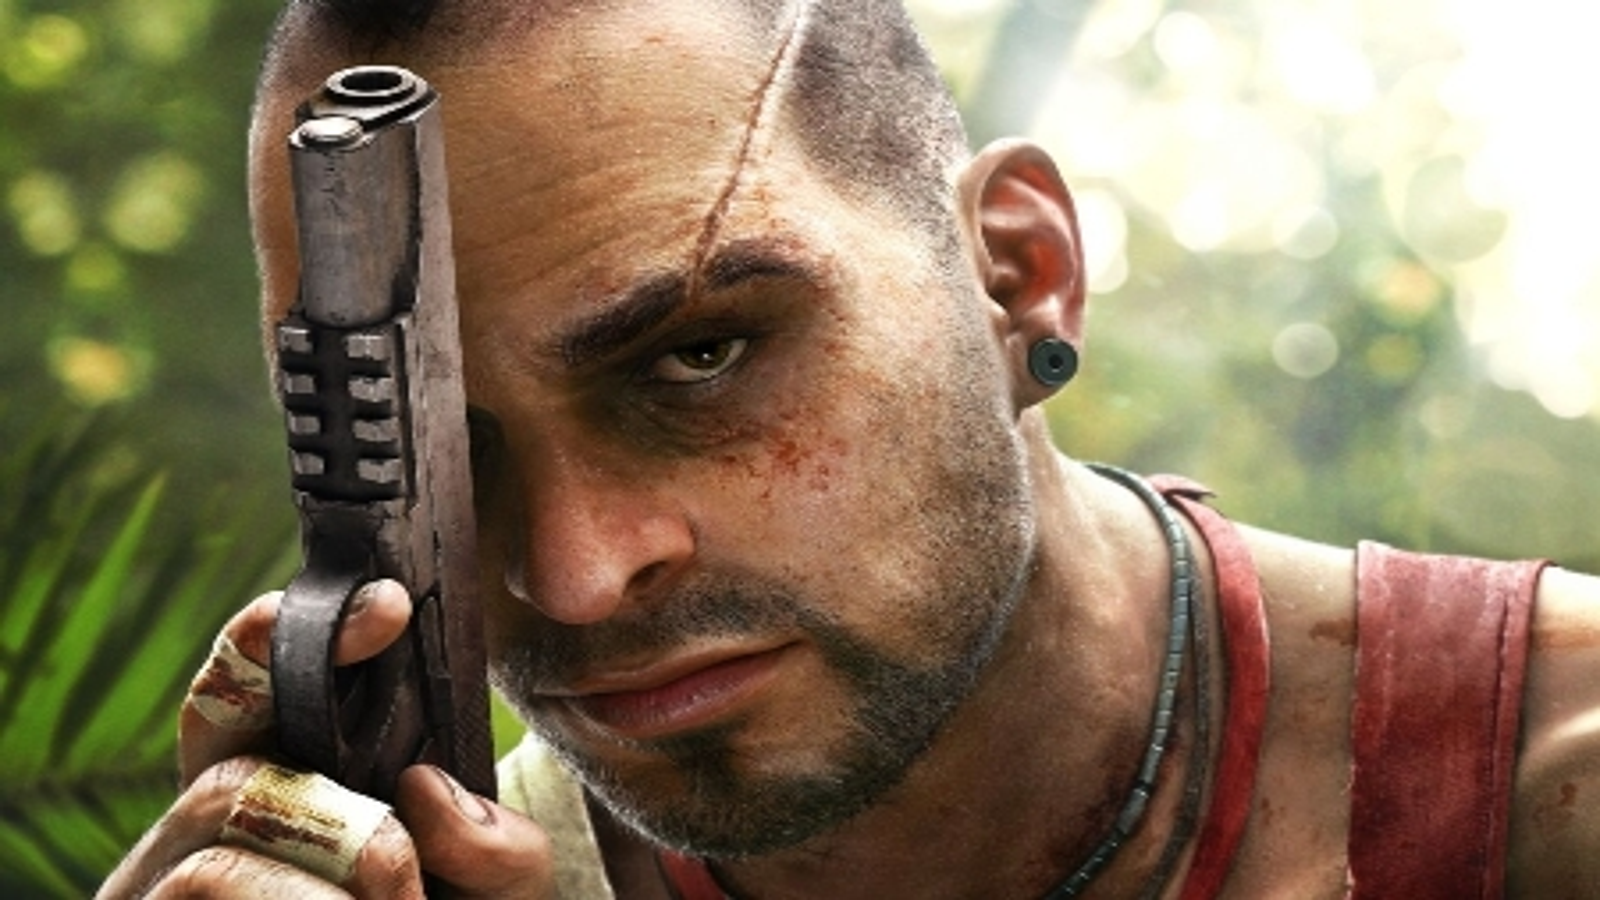 Far Cry 3 is going free this week, and you have four days to claim